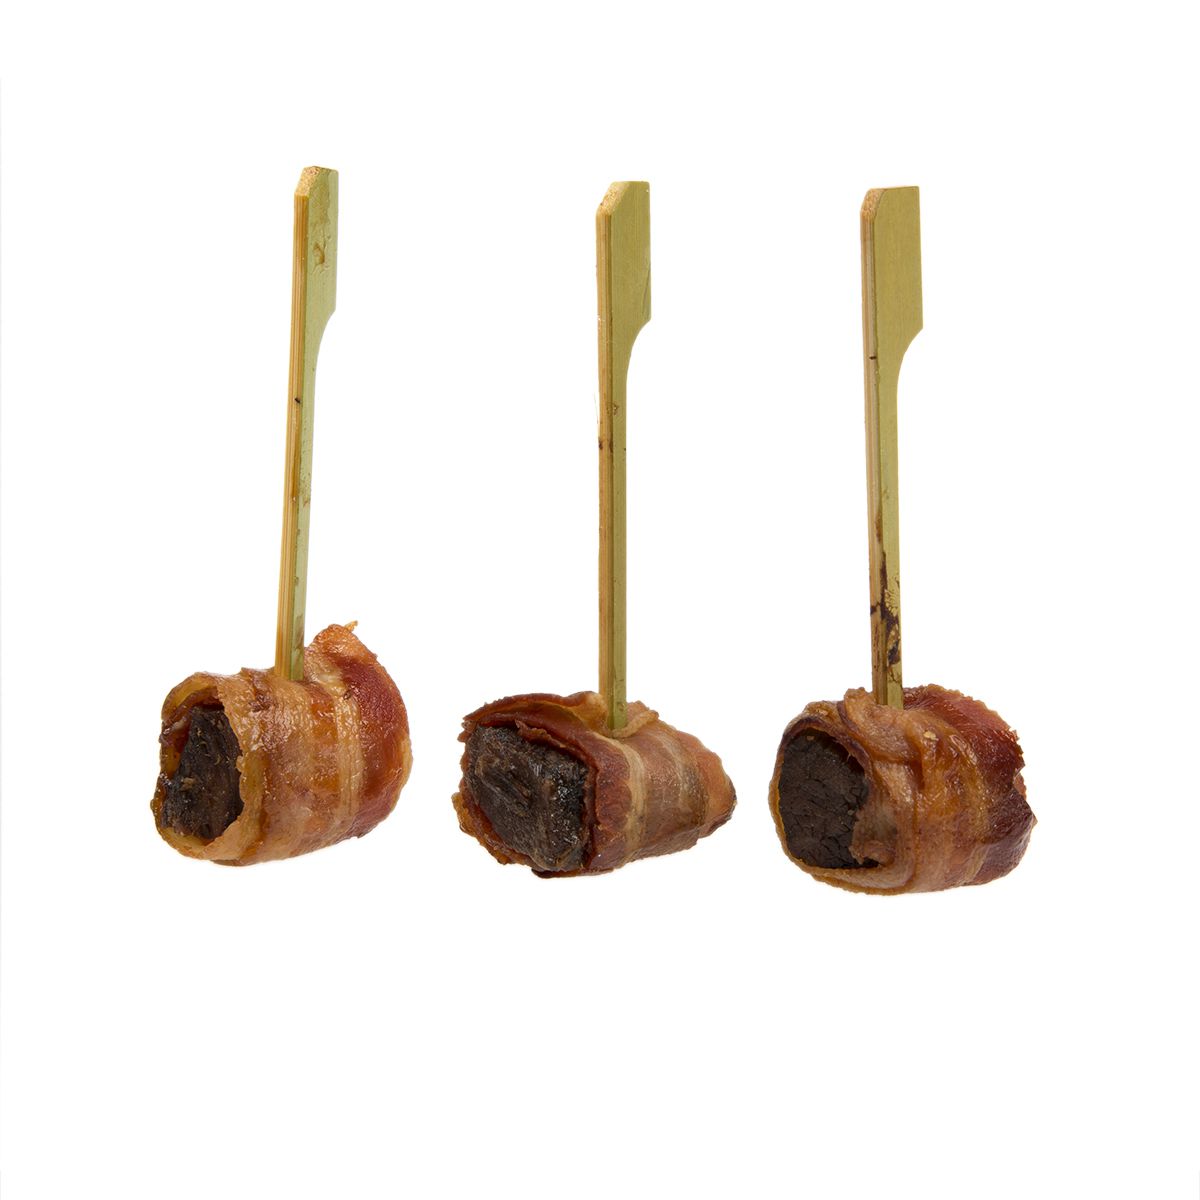 Saugatuck Kitchens Beef Short Rib & Bacon on a Skewer 90 CT